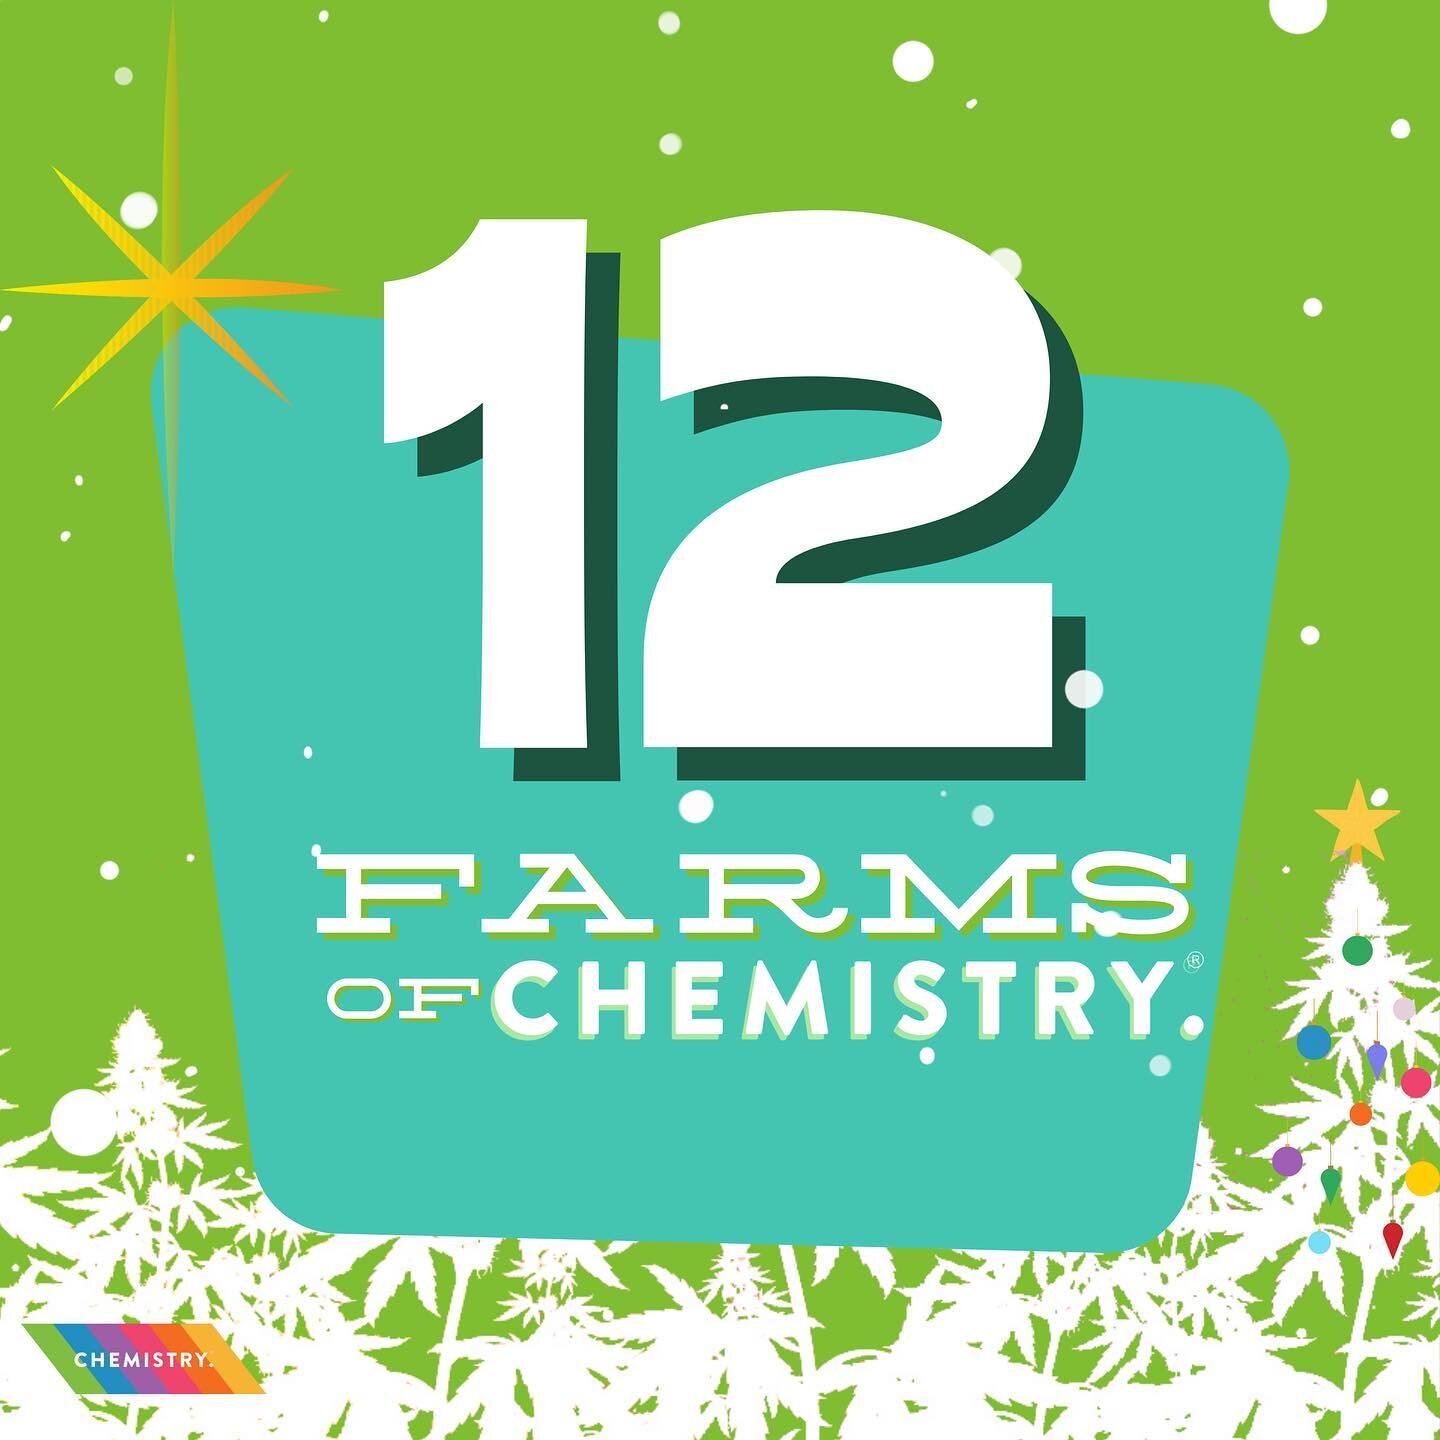 We are proud to be included in the 12 Farms of Chemistry. 🎄✨ To celebrate the launch of @trychemistry Project Fusion 4 pack, follow along to see Chemistry's farms &amp; learn more about where your weed is grown 💚🌈 ❄️

Some of Northern California&r